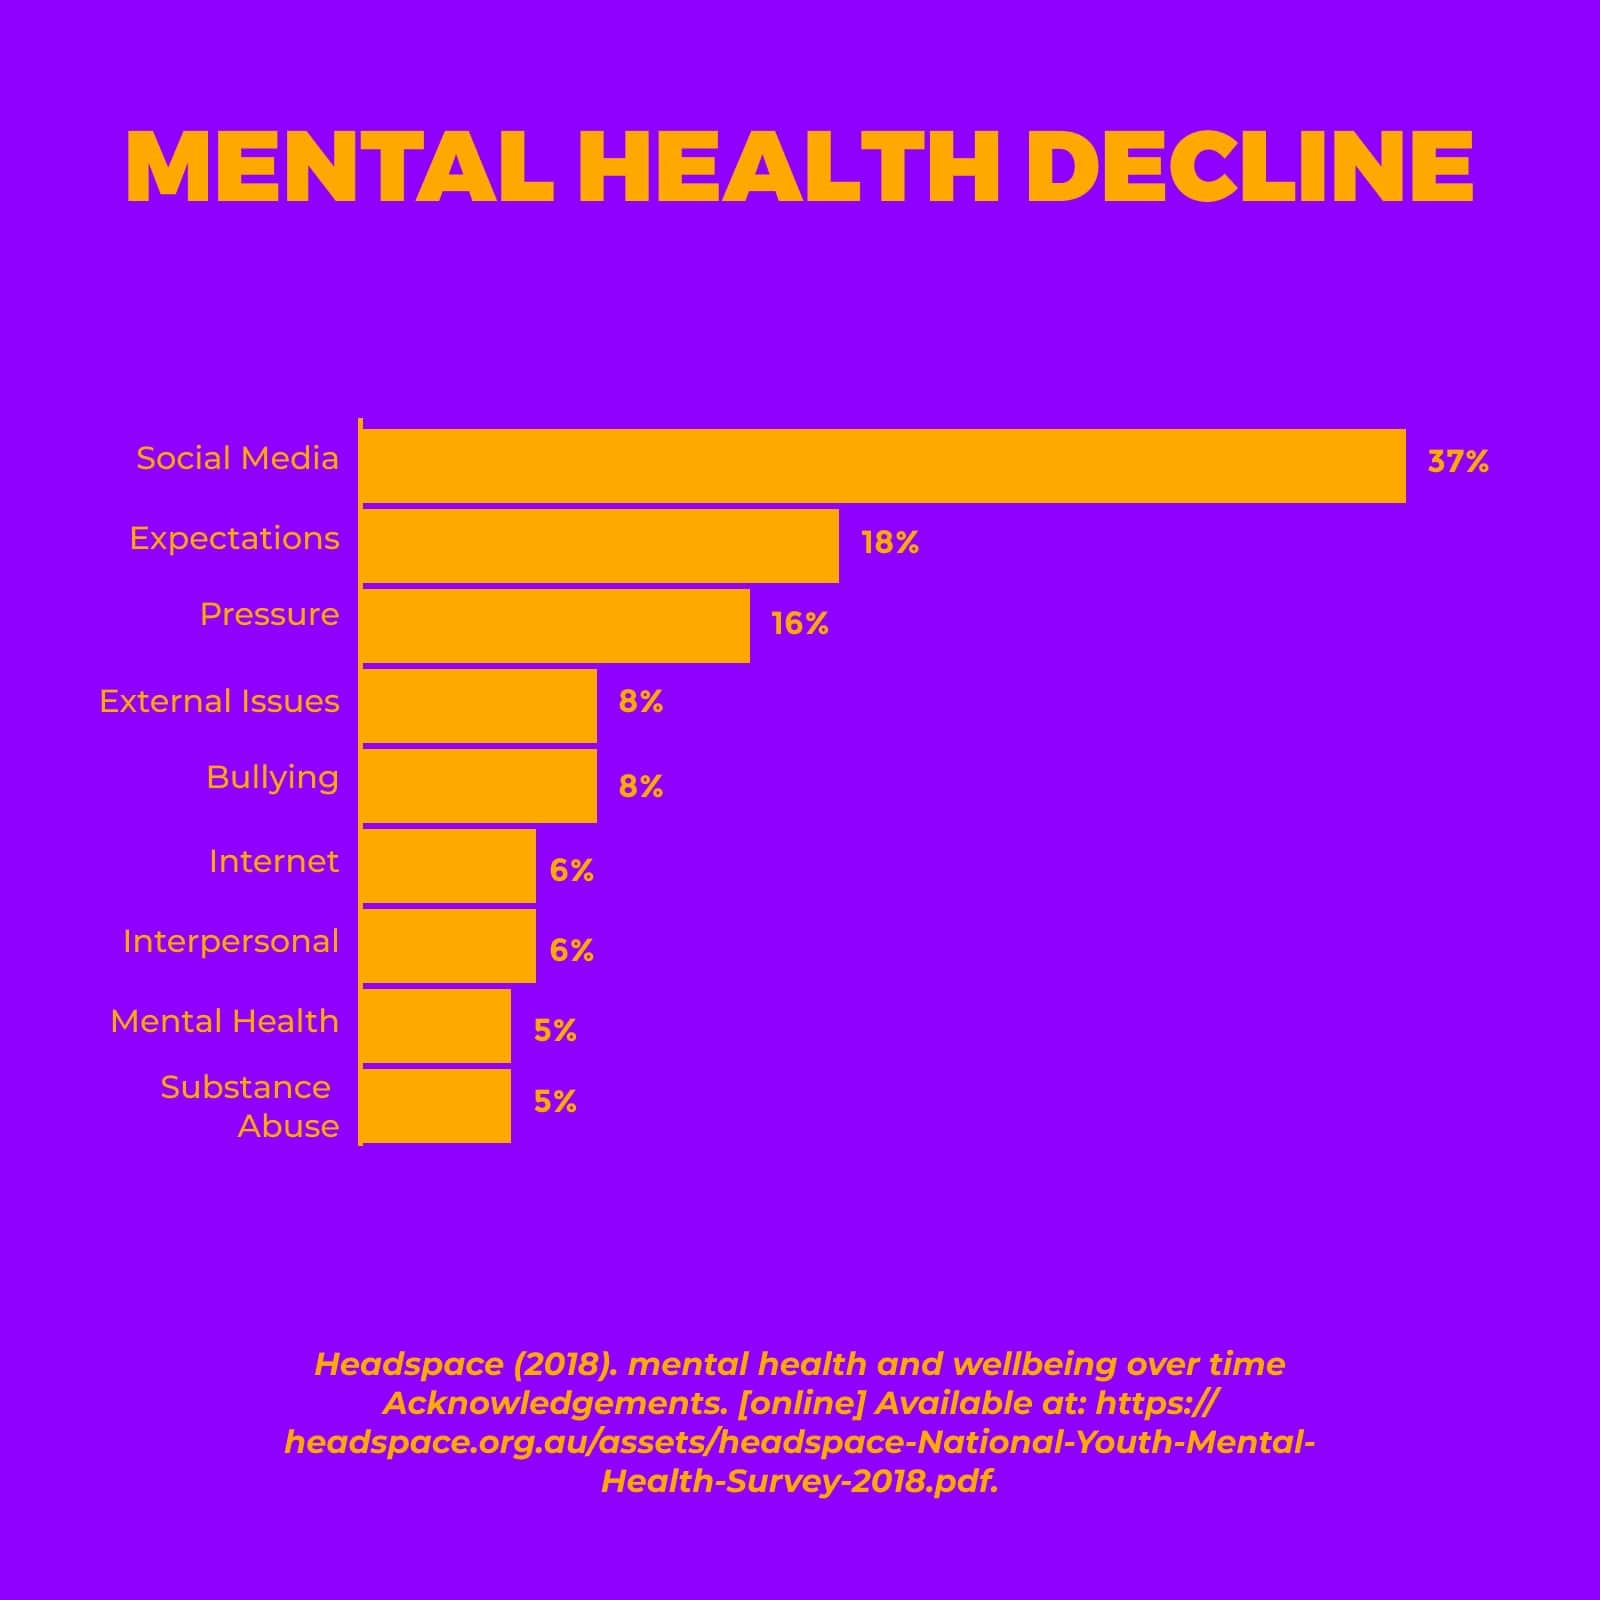 Chart of mental health decline by teens based on reasons